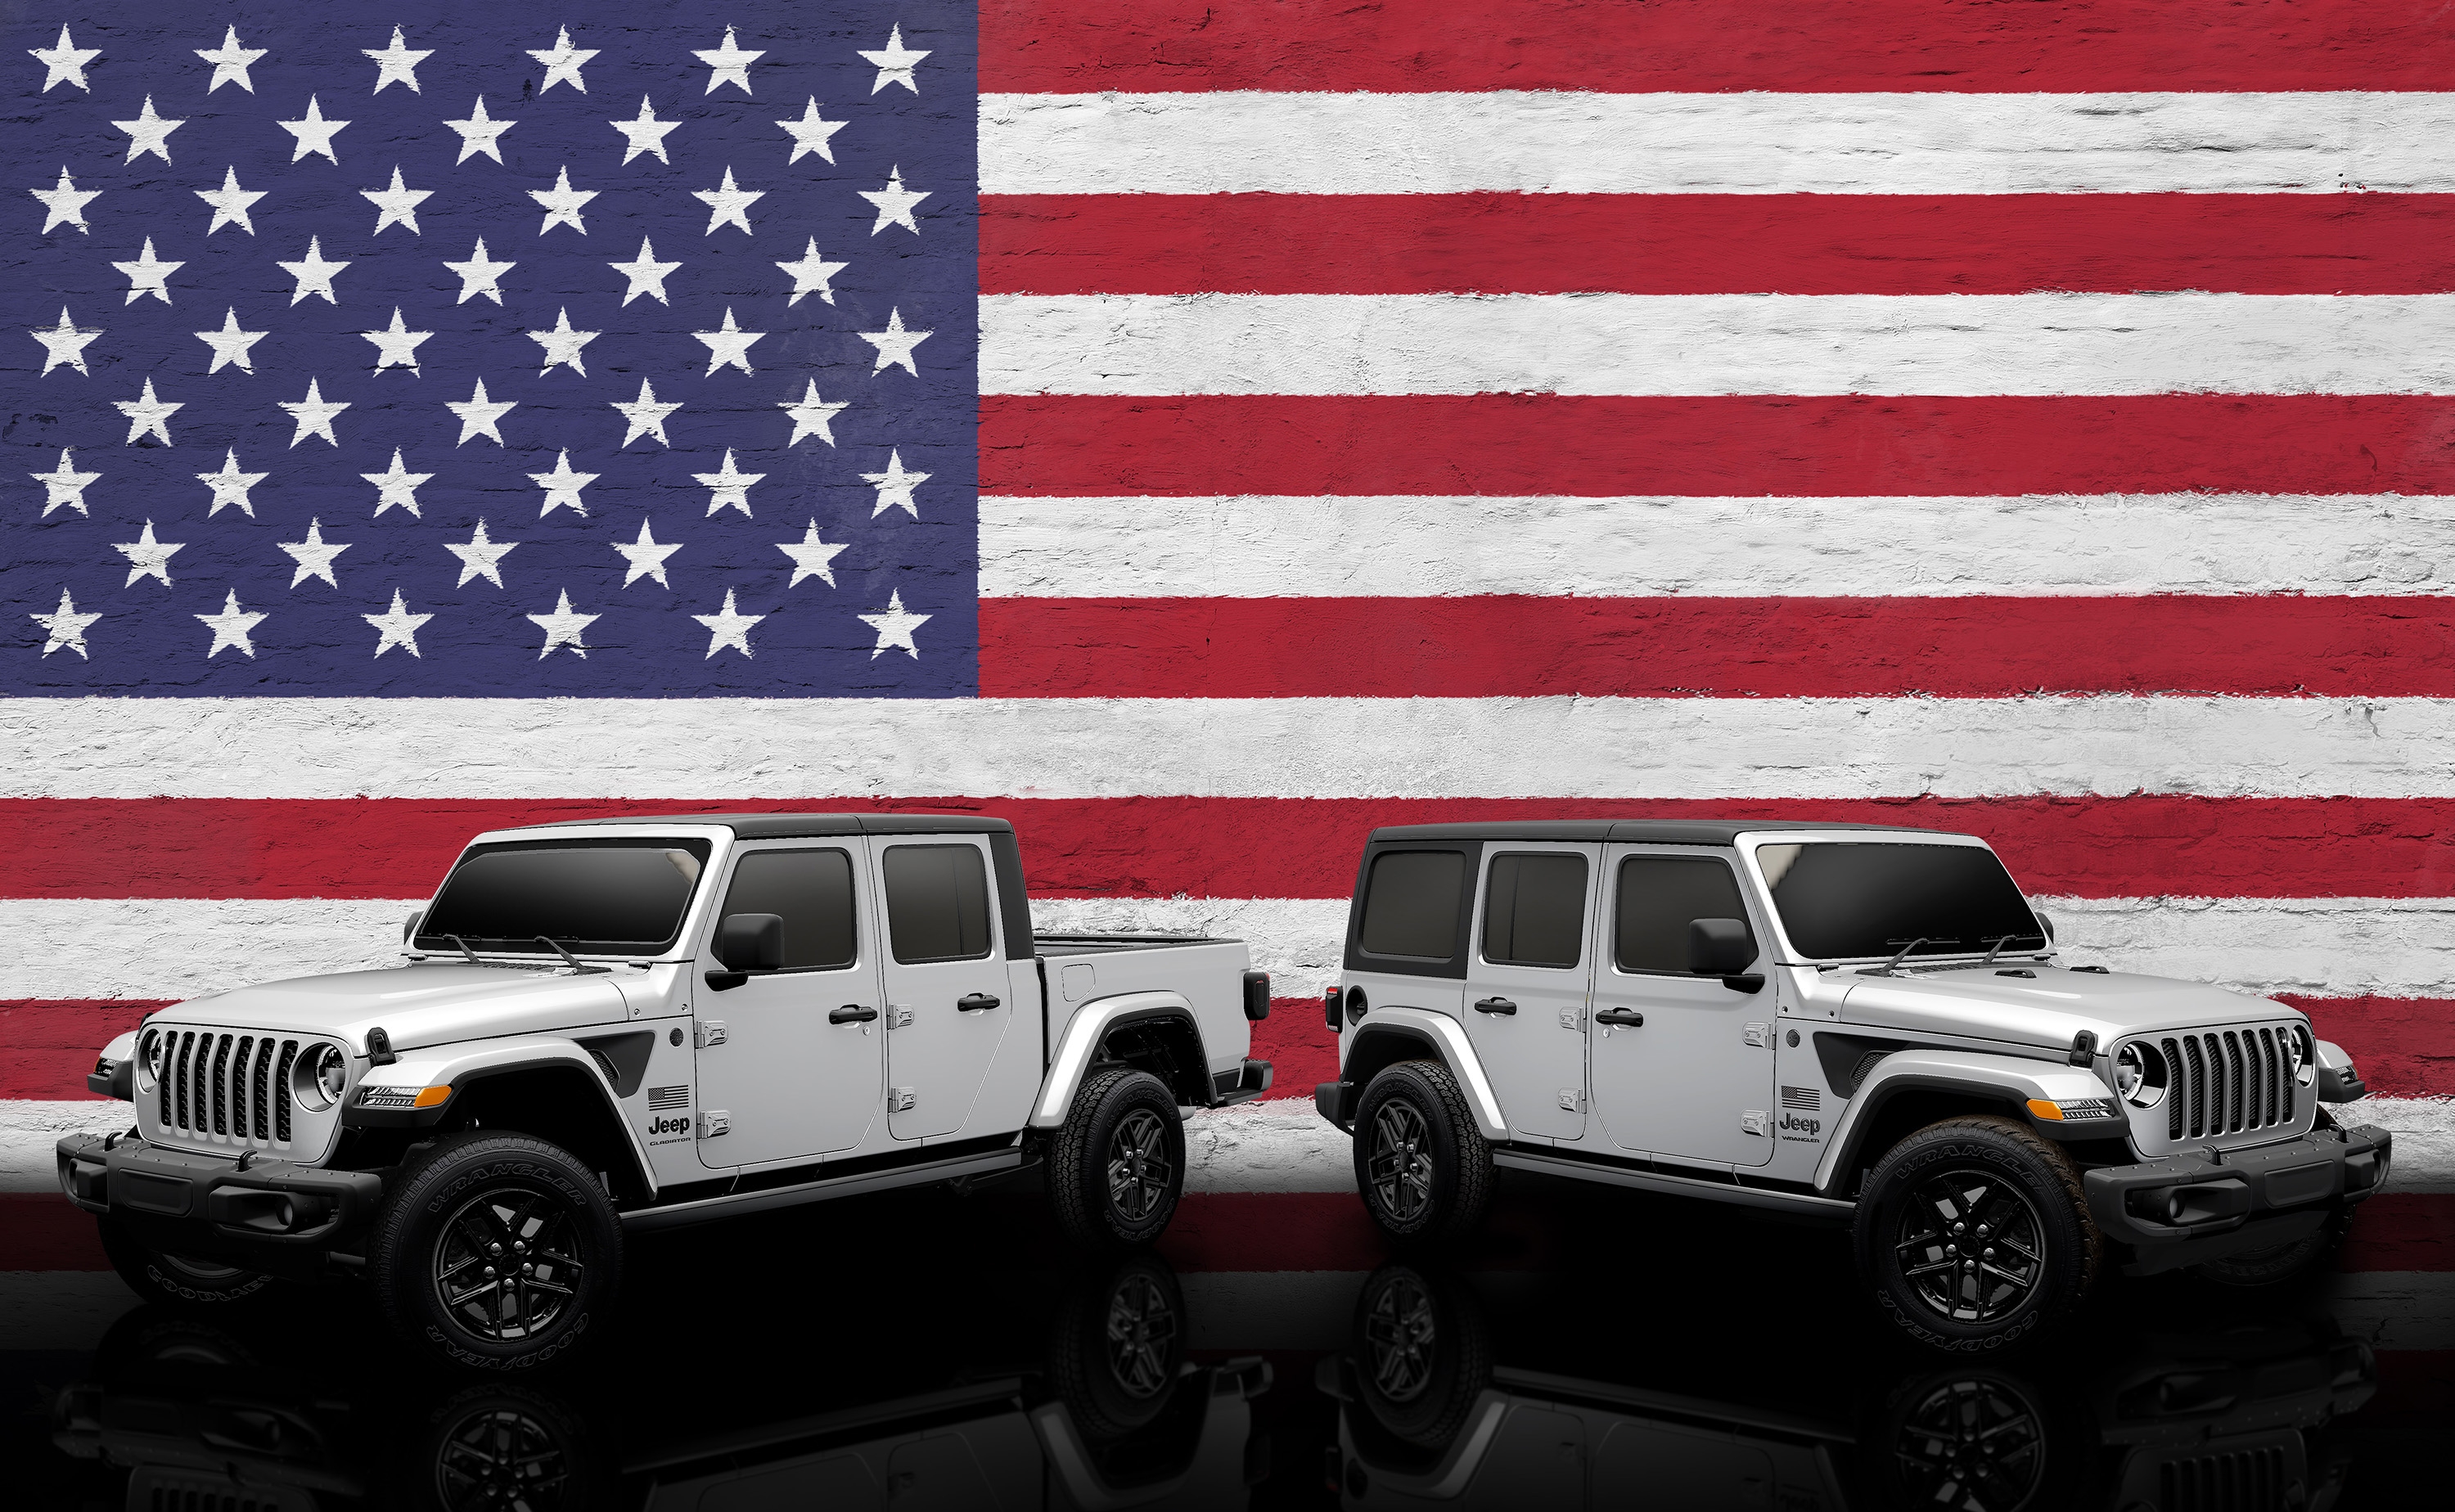 Jeep’s Freedom Package Salutes the Stars & Stripes, Donates to Military Charities